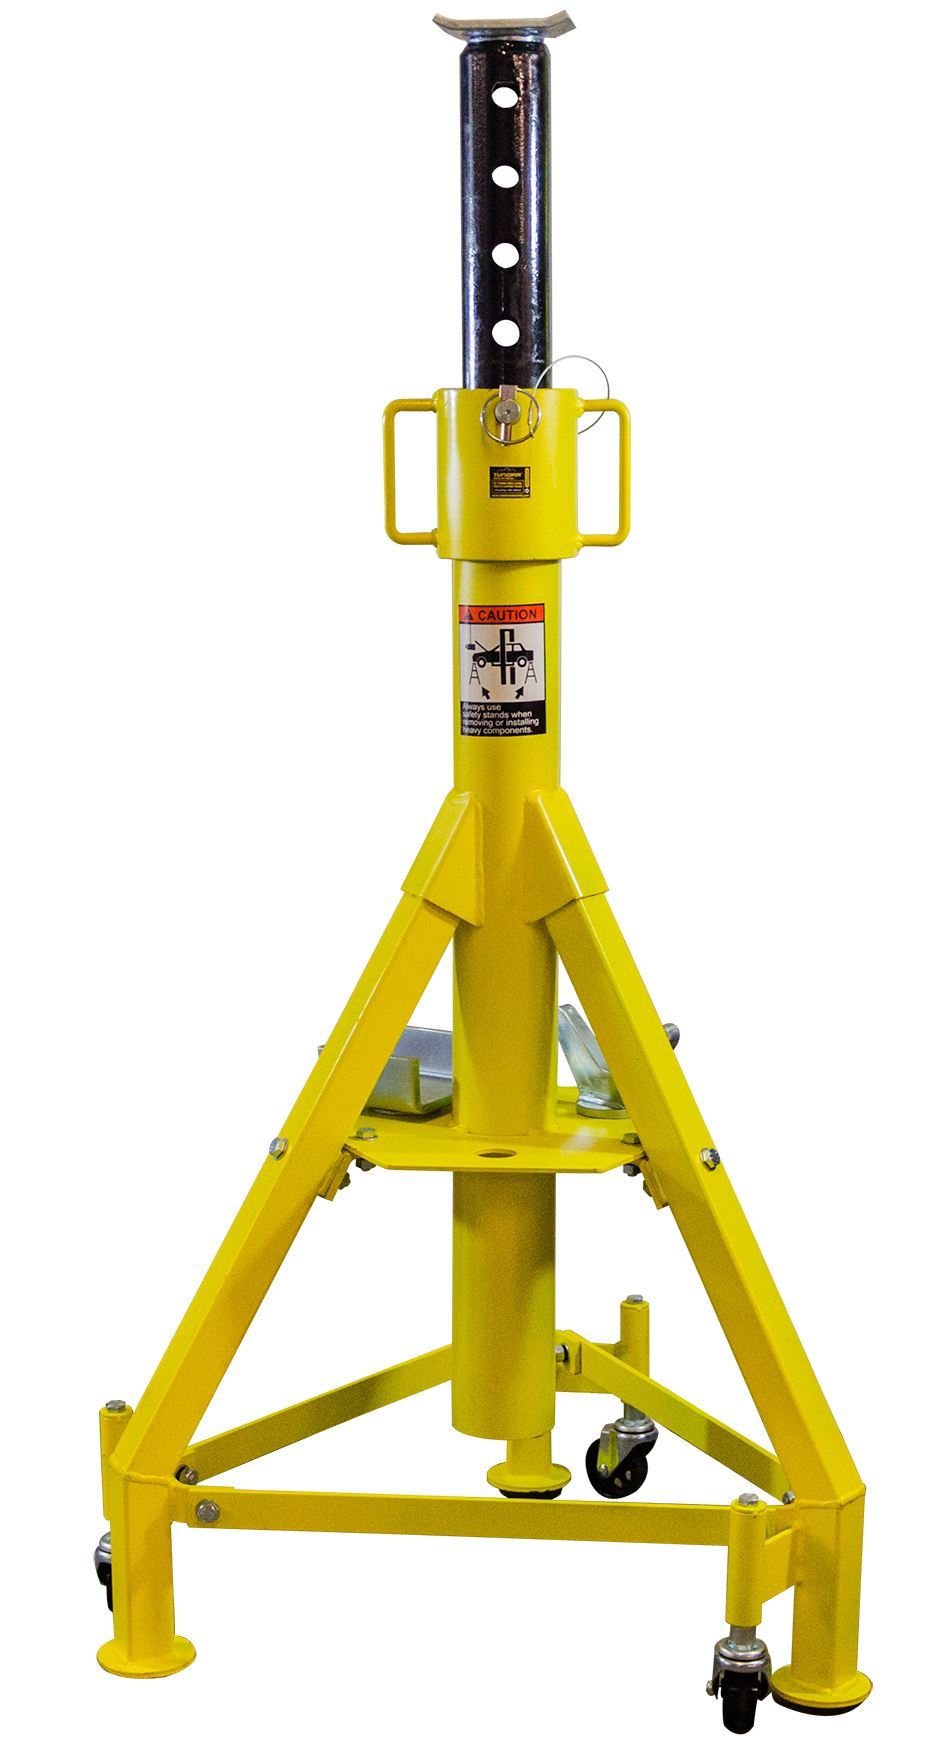 Tundra 12 Tonne High Level Vehicle Support Axle Stands